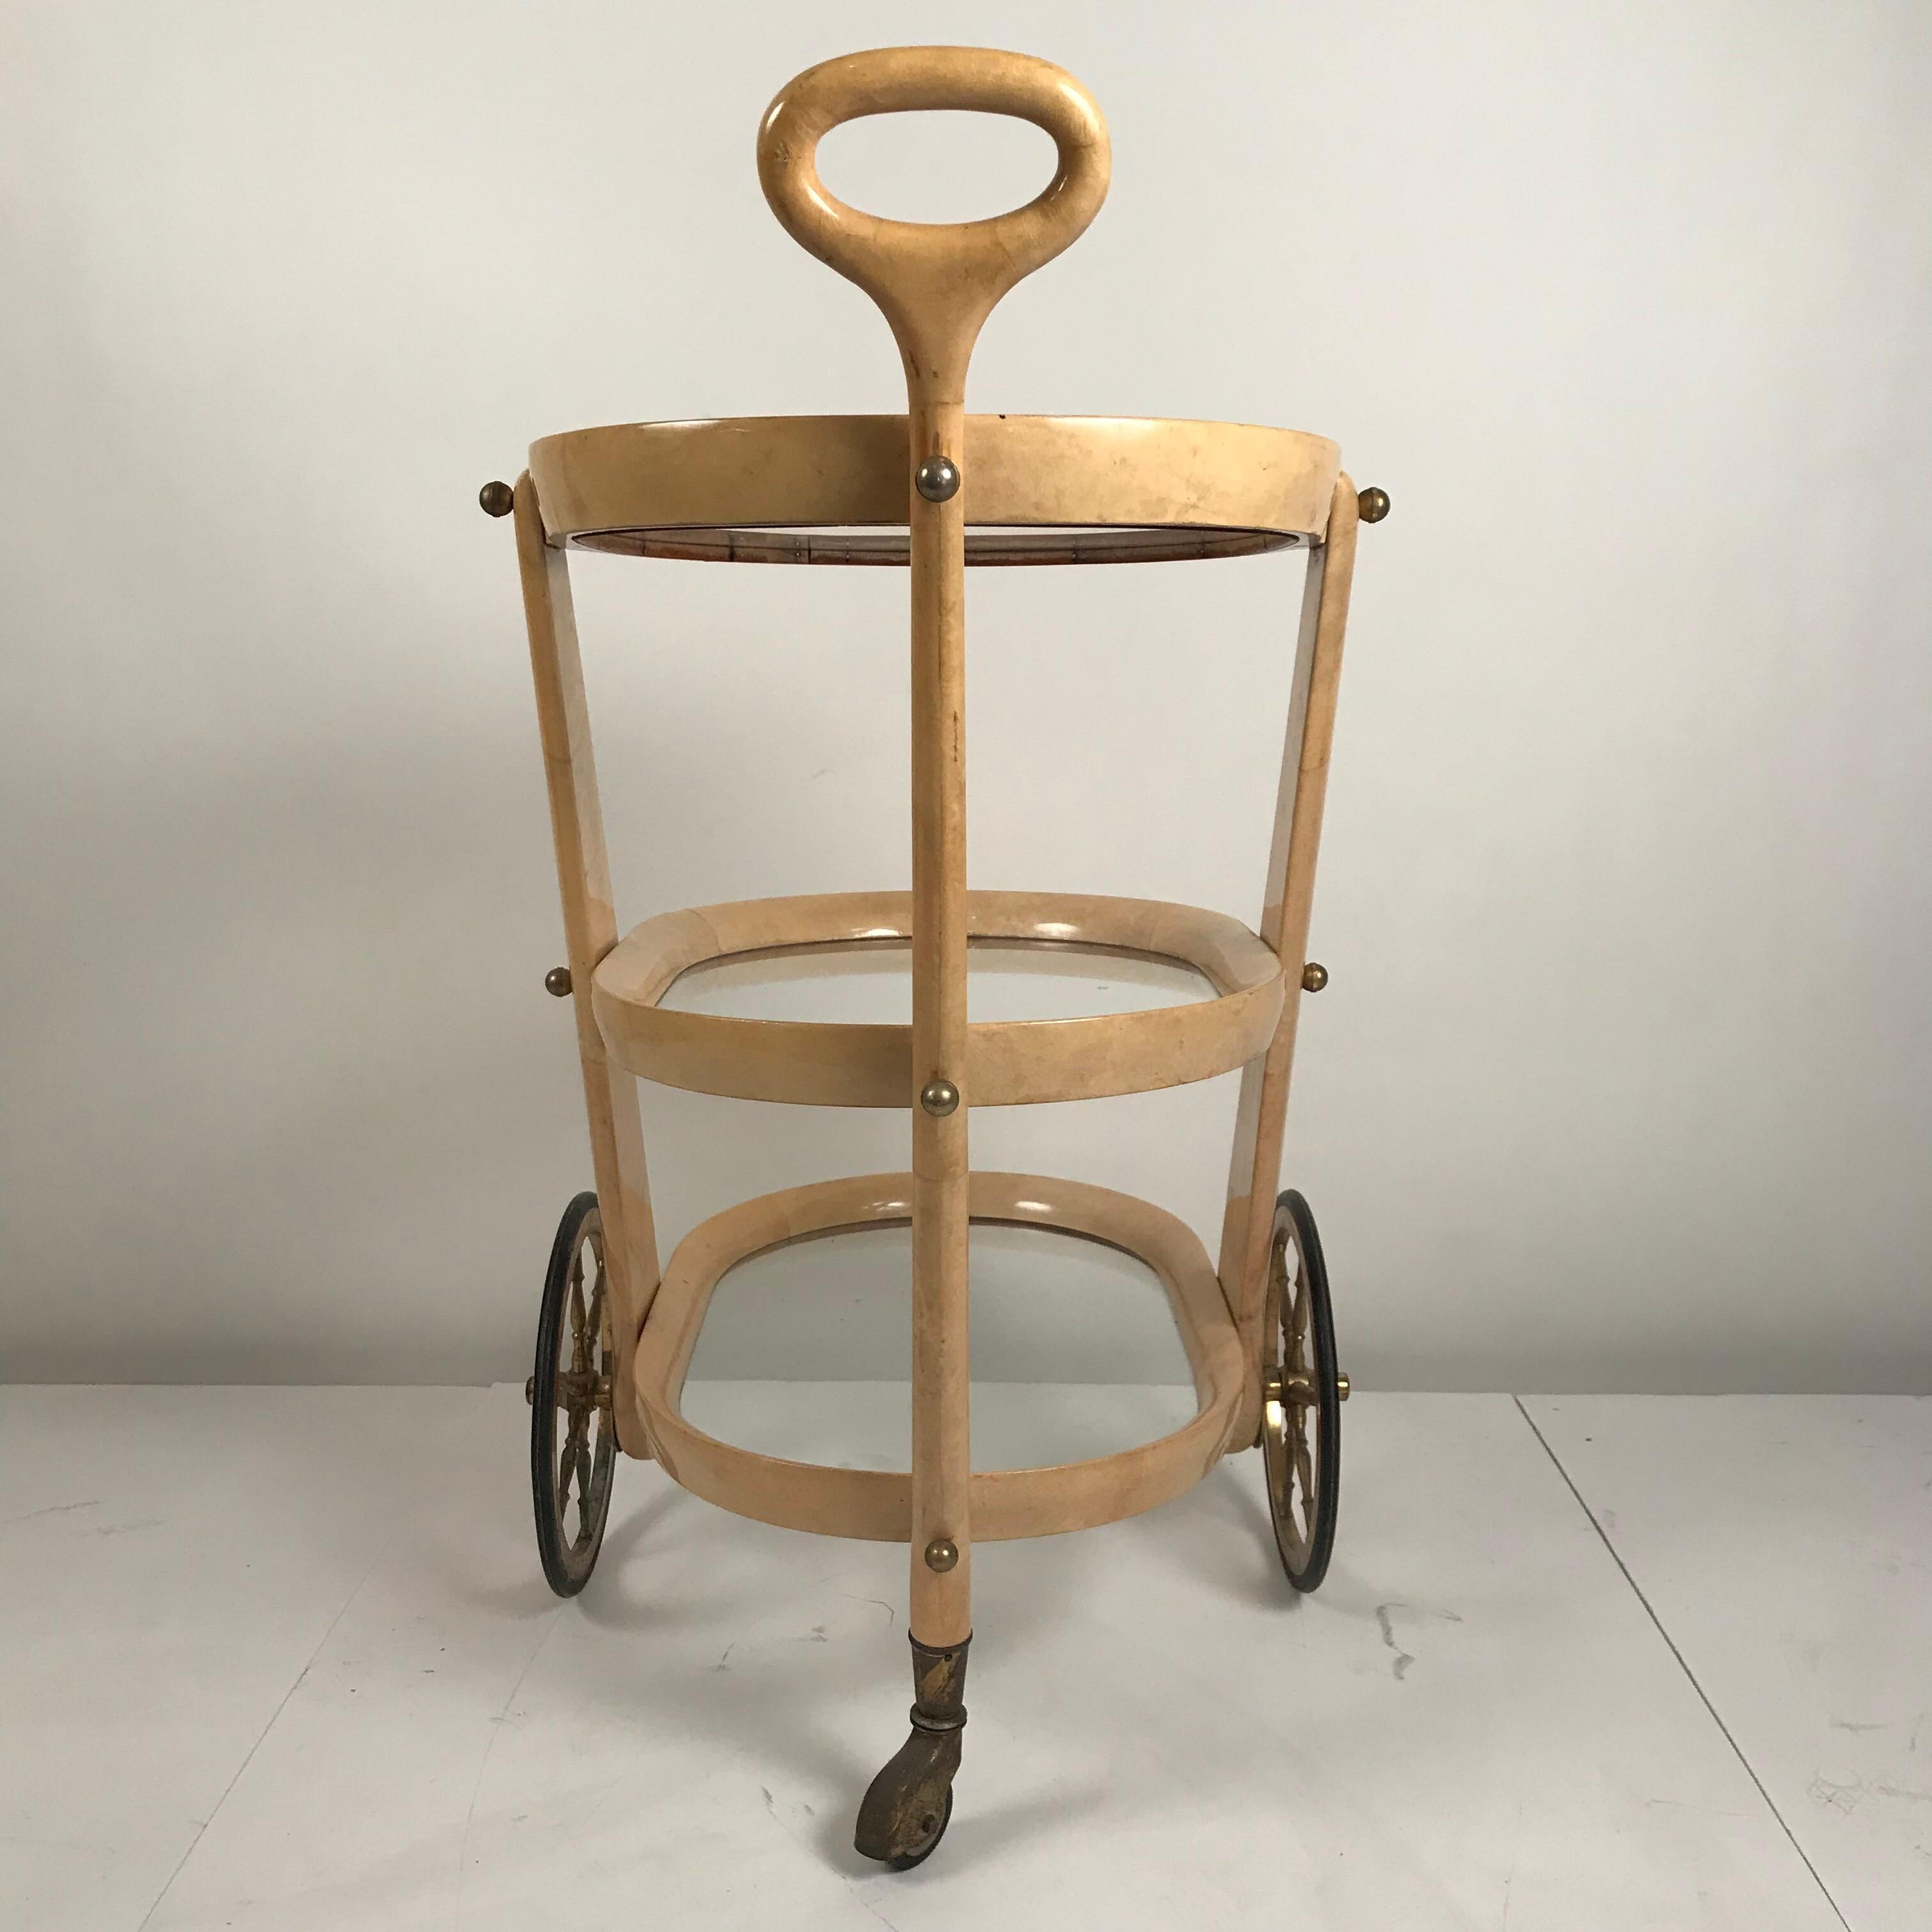 Elegant and rare bar cart by Aldo Tura / Milano. The wooden structure is covered with clear coated parchment in it's natural color. The metal fittings and wheels are made in brass.